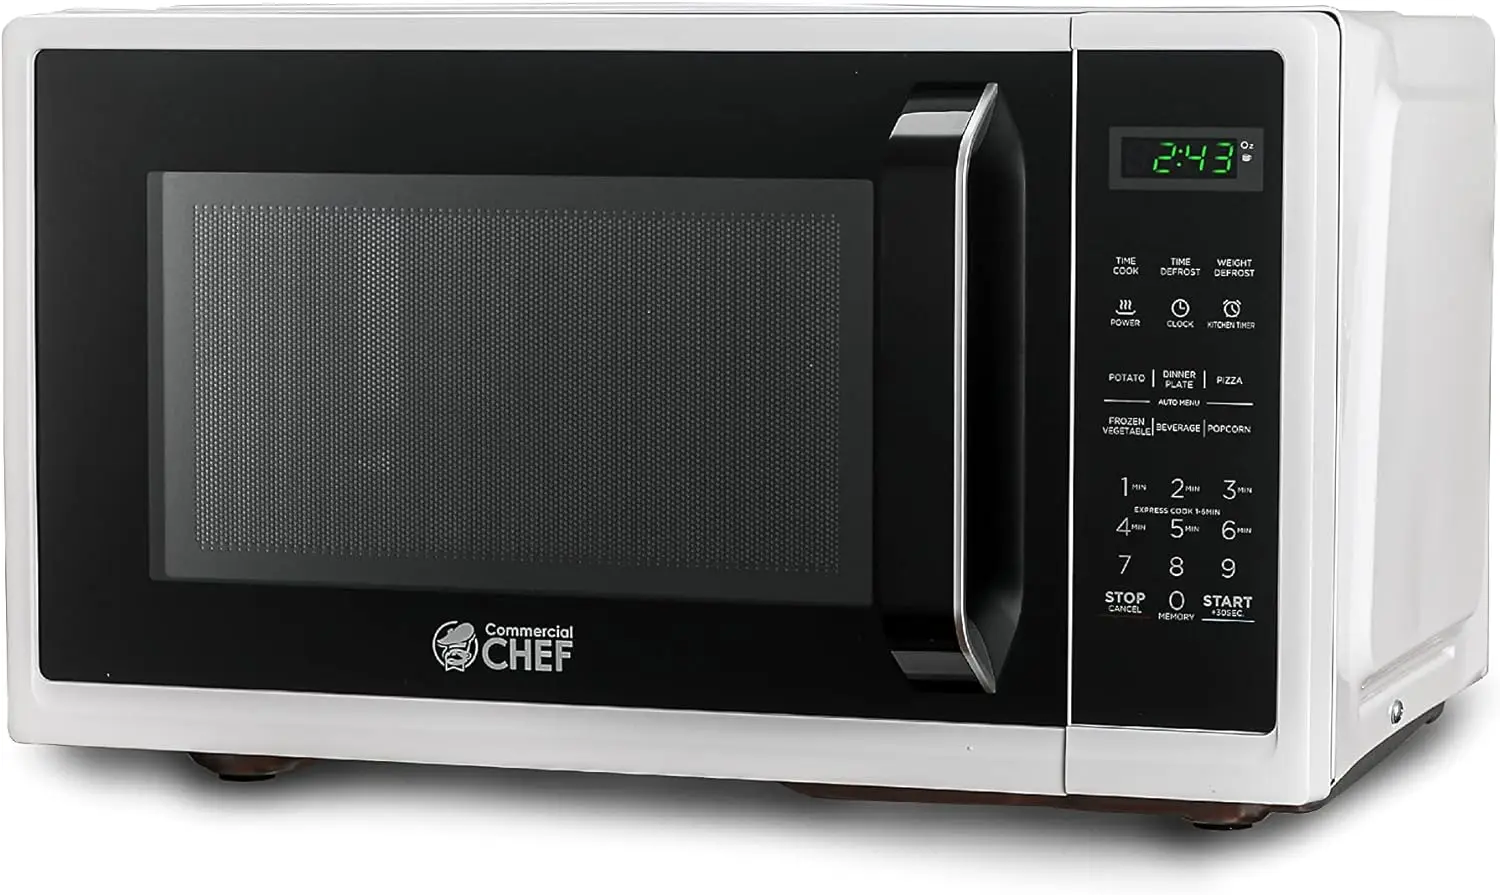 

CHEF Small Microwave 0.9 Cu. Ft. Countertop Microwave with Digital Display, White Microwave & 10 Power Levels, Outstanding P Mic